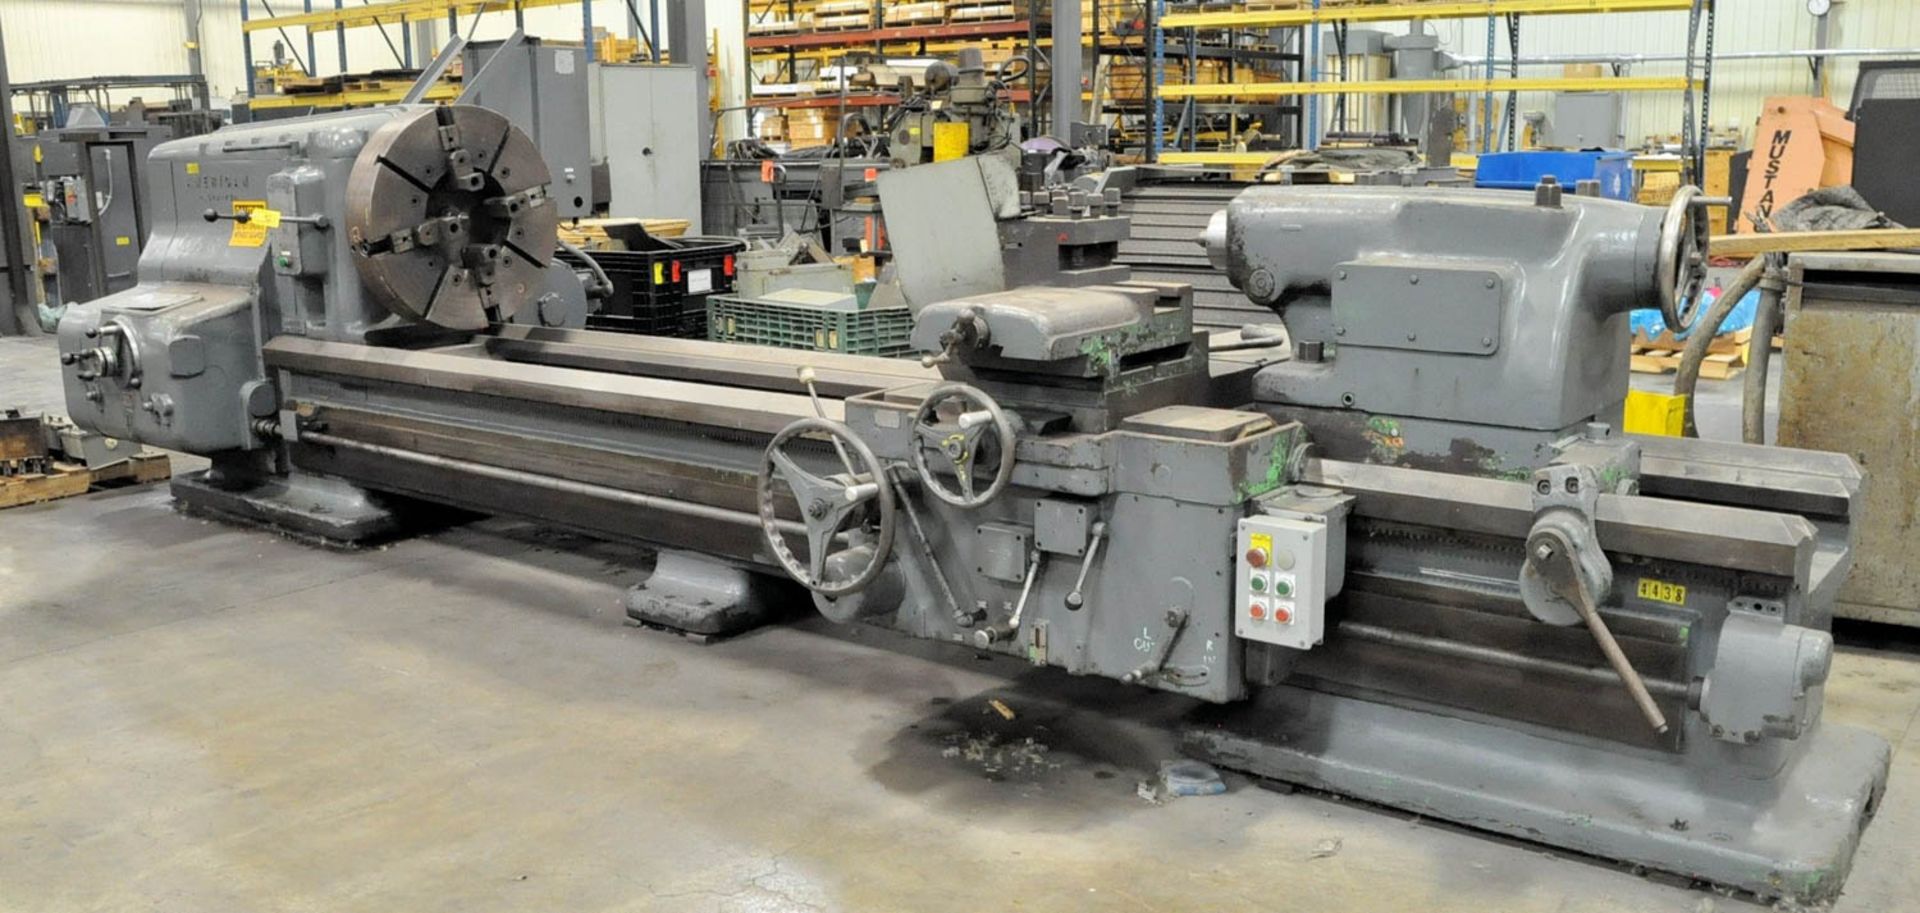 AMERICAN PACEMAKER MDL. 1, GEARED HEAD ENGINE LATHE, S/N: N/A, 32" SWING, 132" BETWEEN CENTERS,